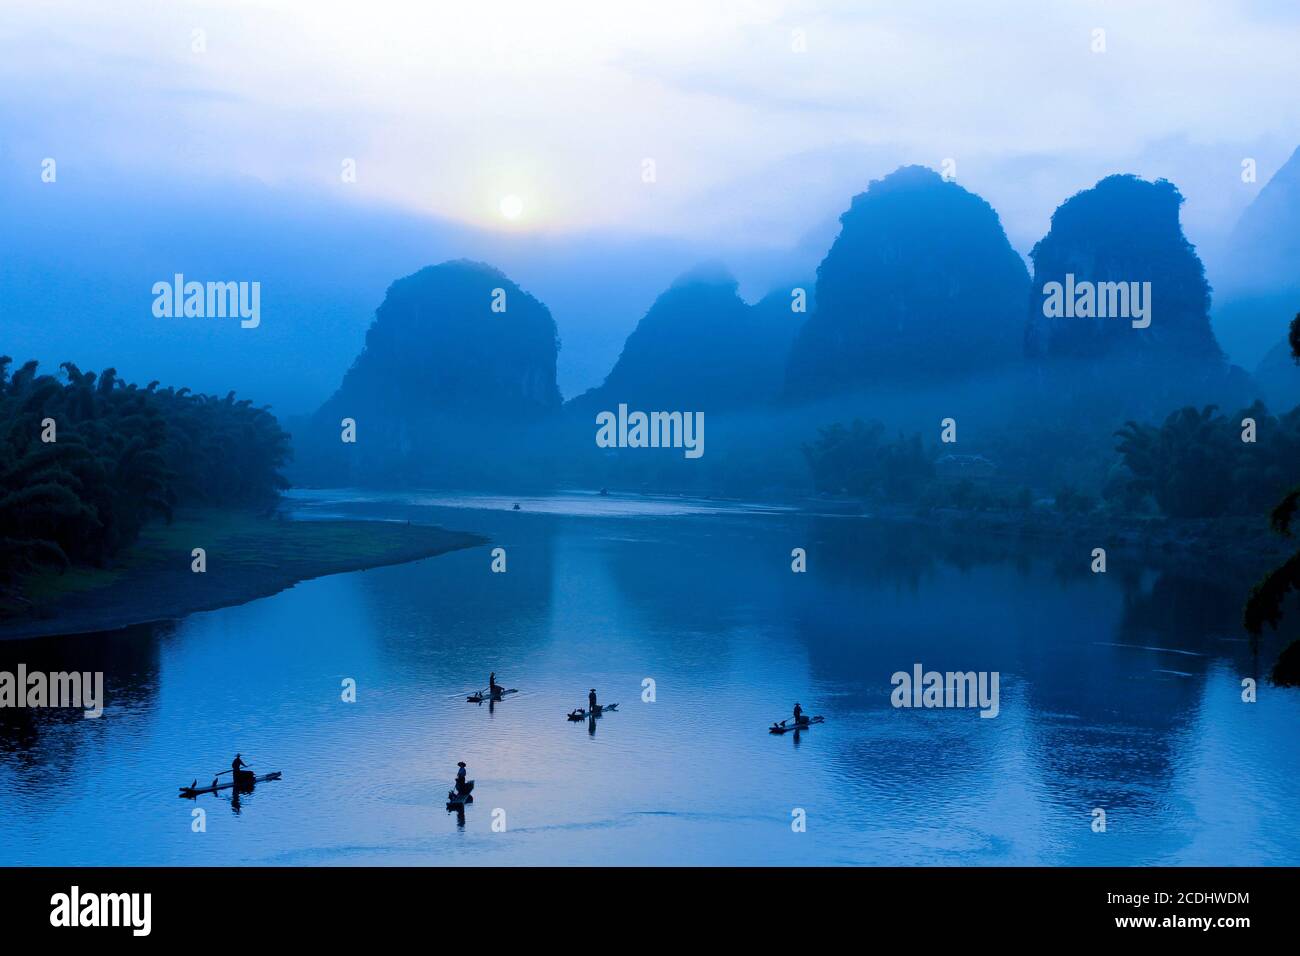 scenery in Guilin, China Stock Photo